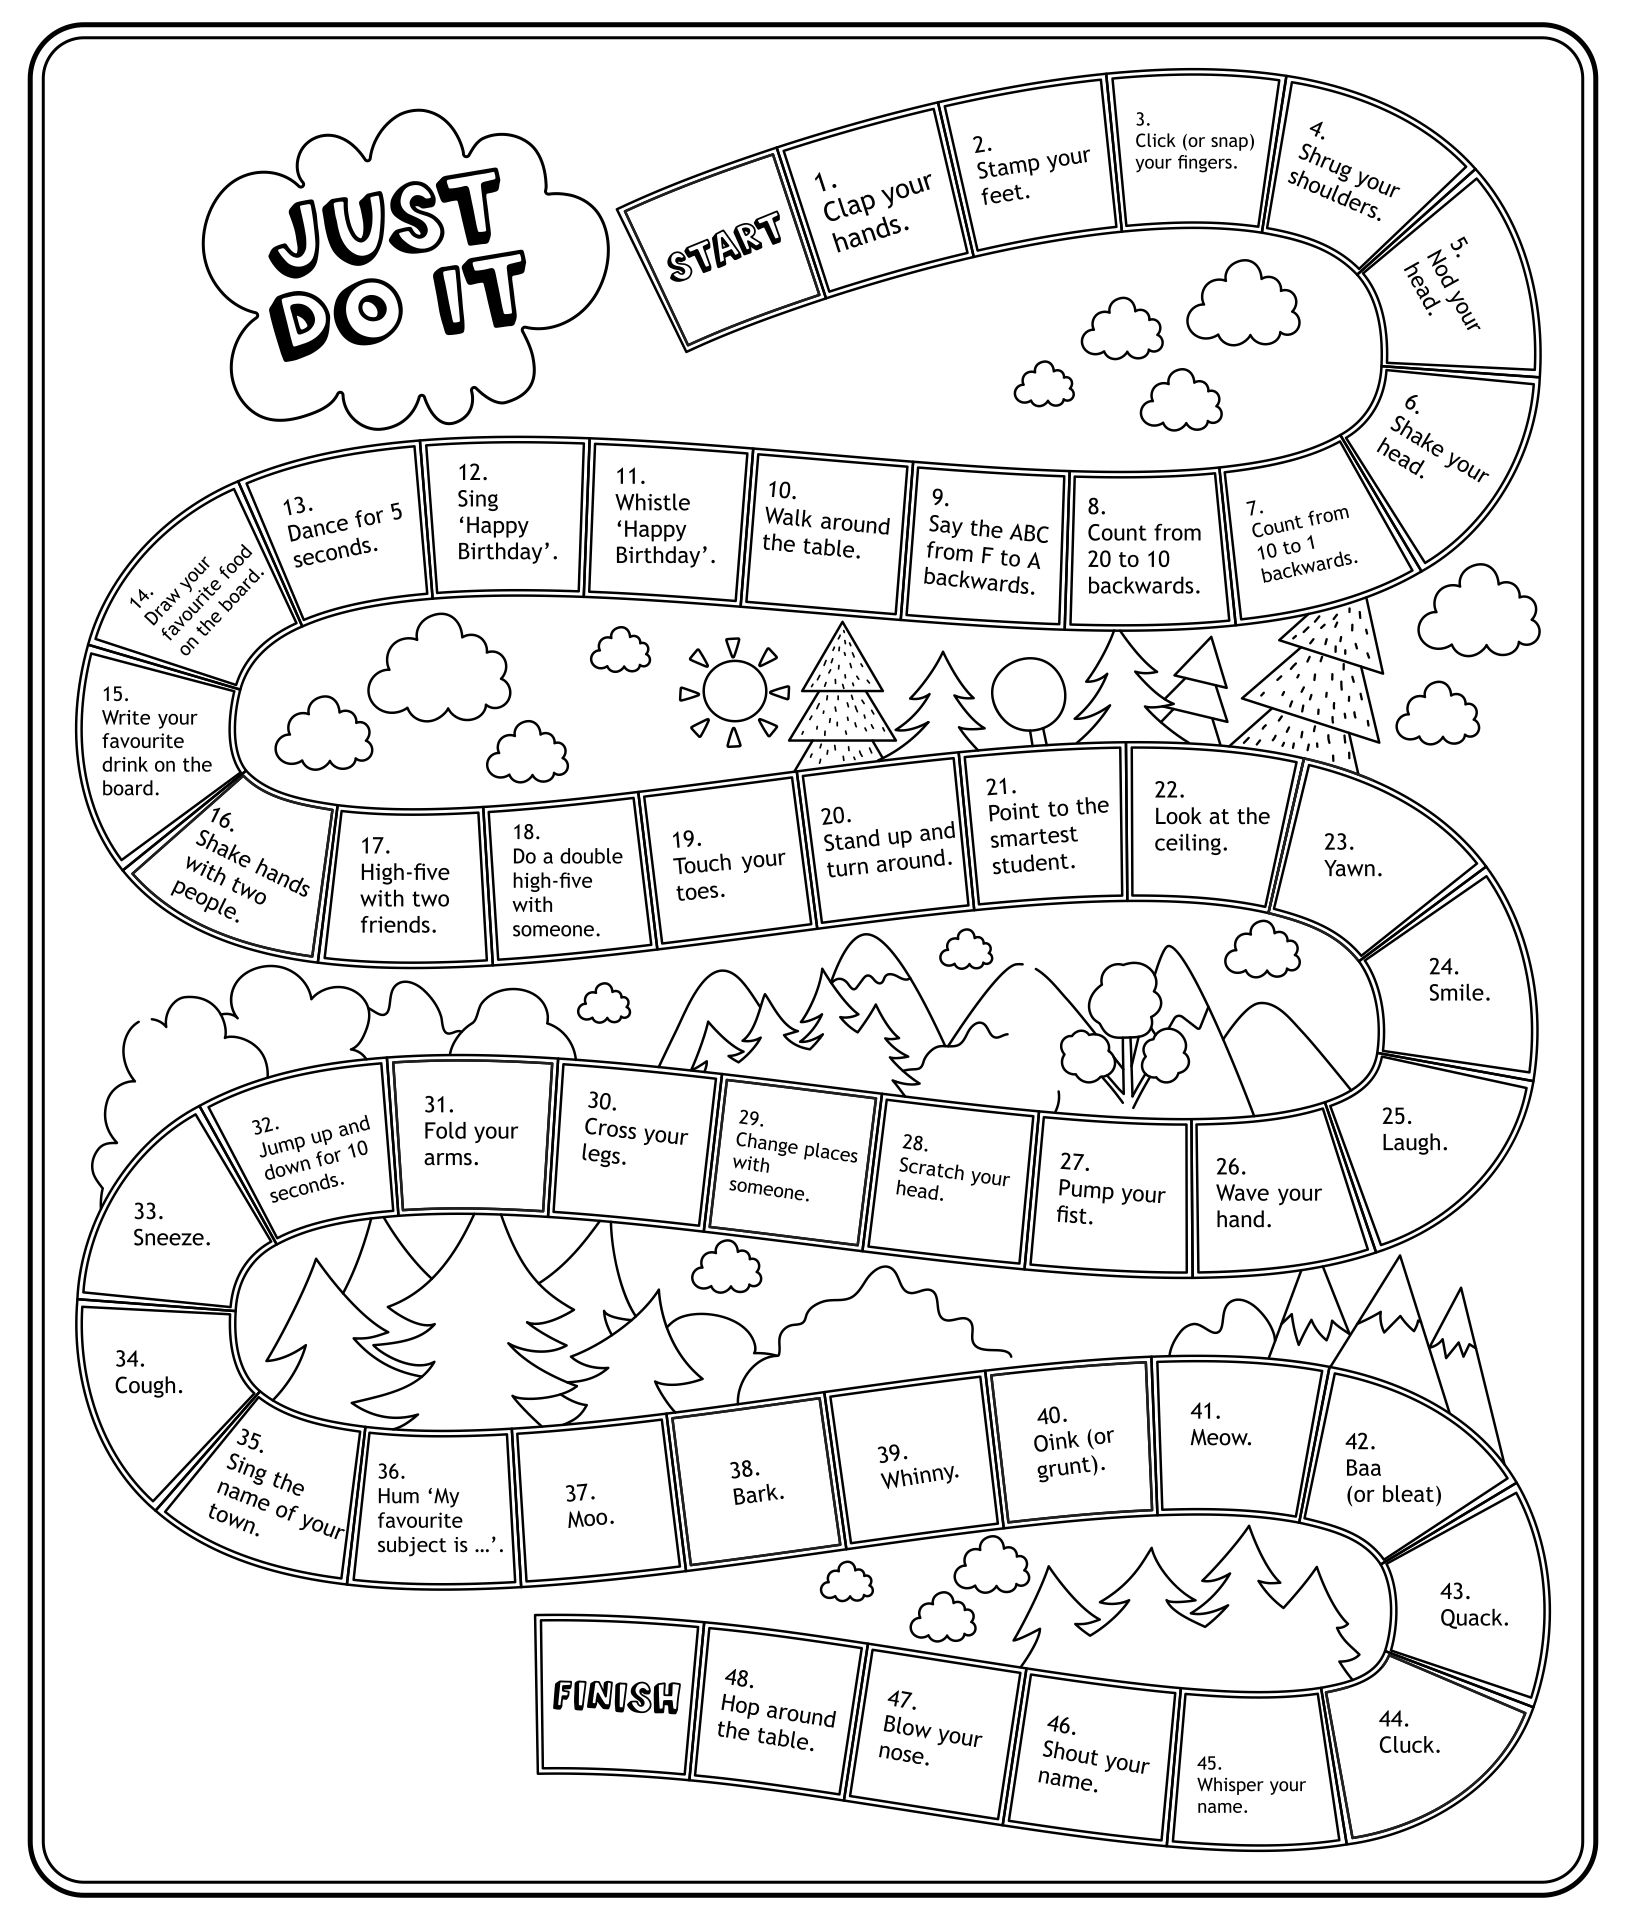 6-best-images-of-printable-board-games-fun-free-printable-monopoly-board-game-printable-esl